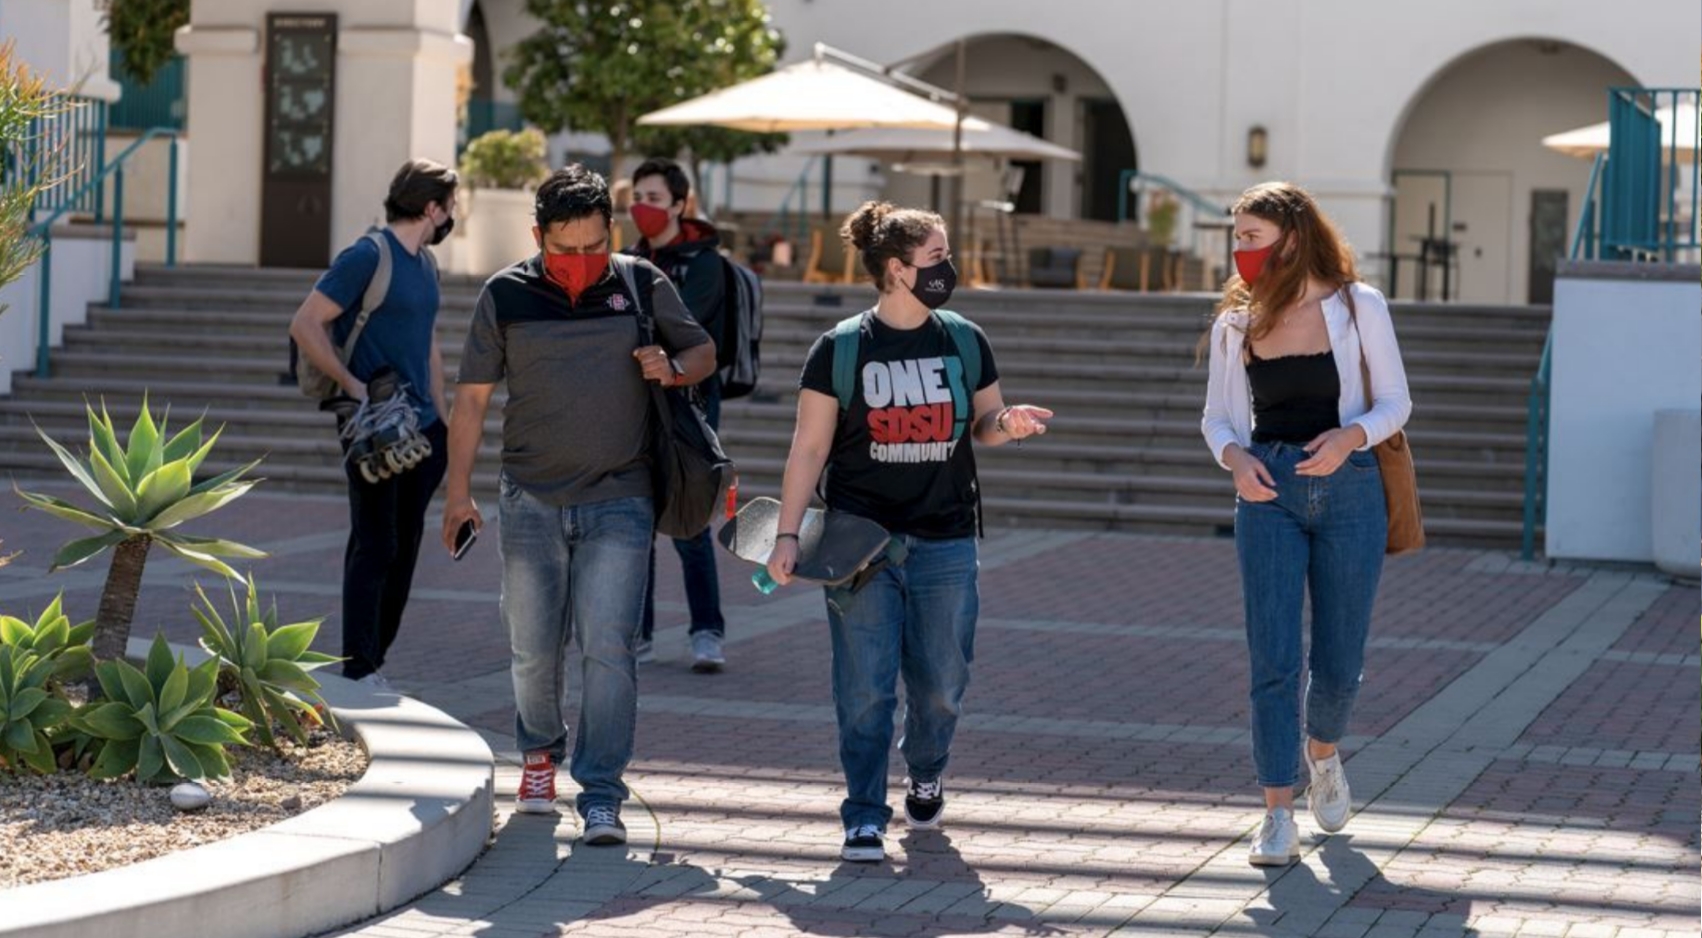 San Diego State University's Community of Care program aims to address the mental health impact of the ongoing COVID-19 pandemic on the campus community.